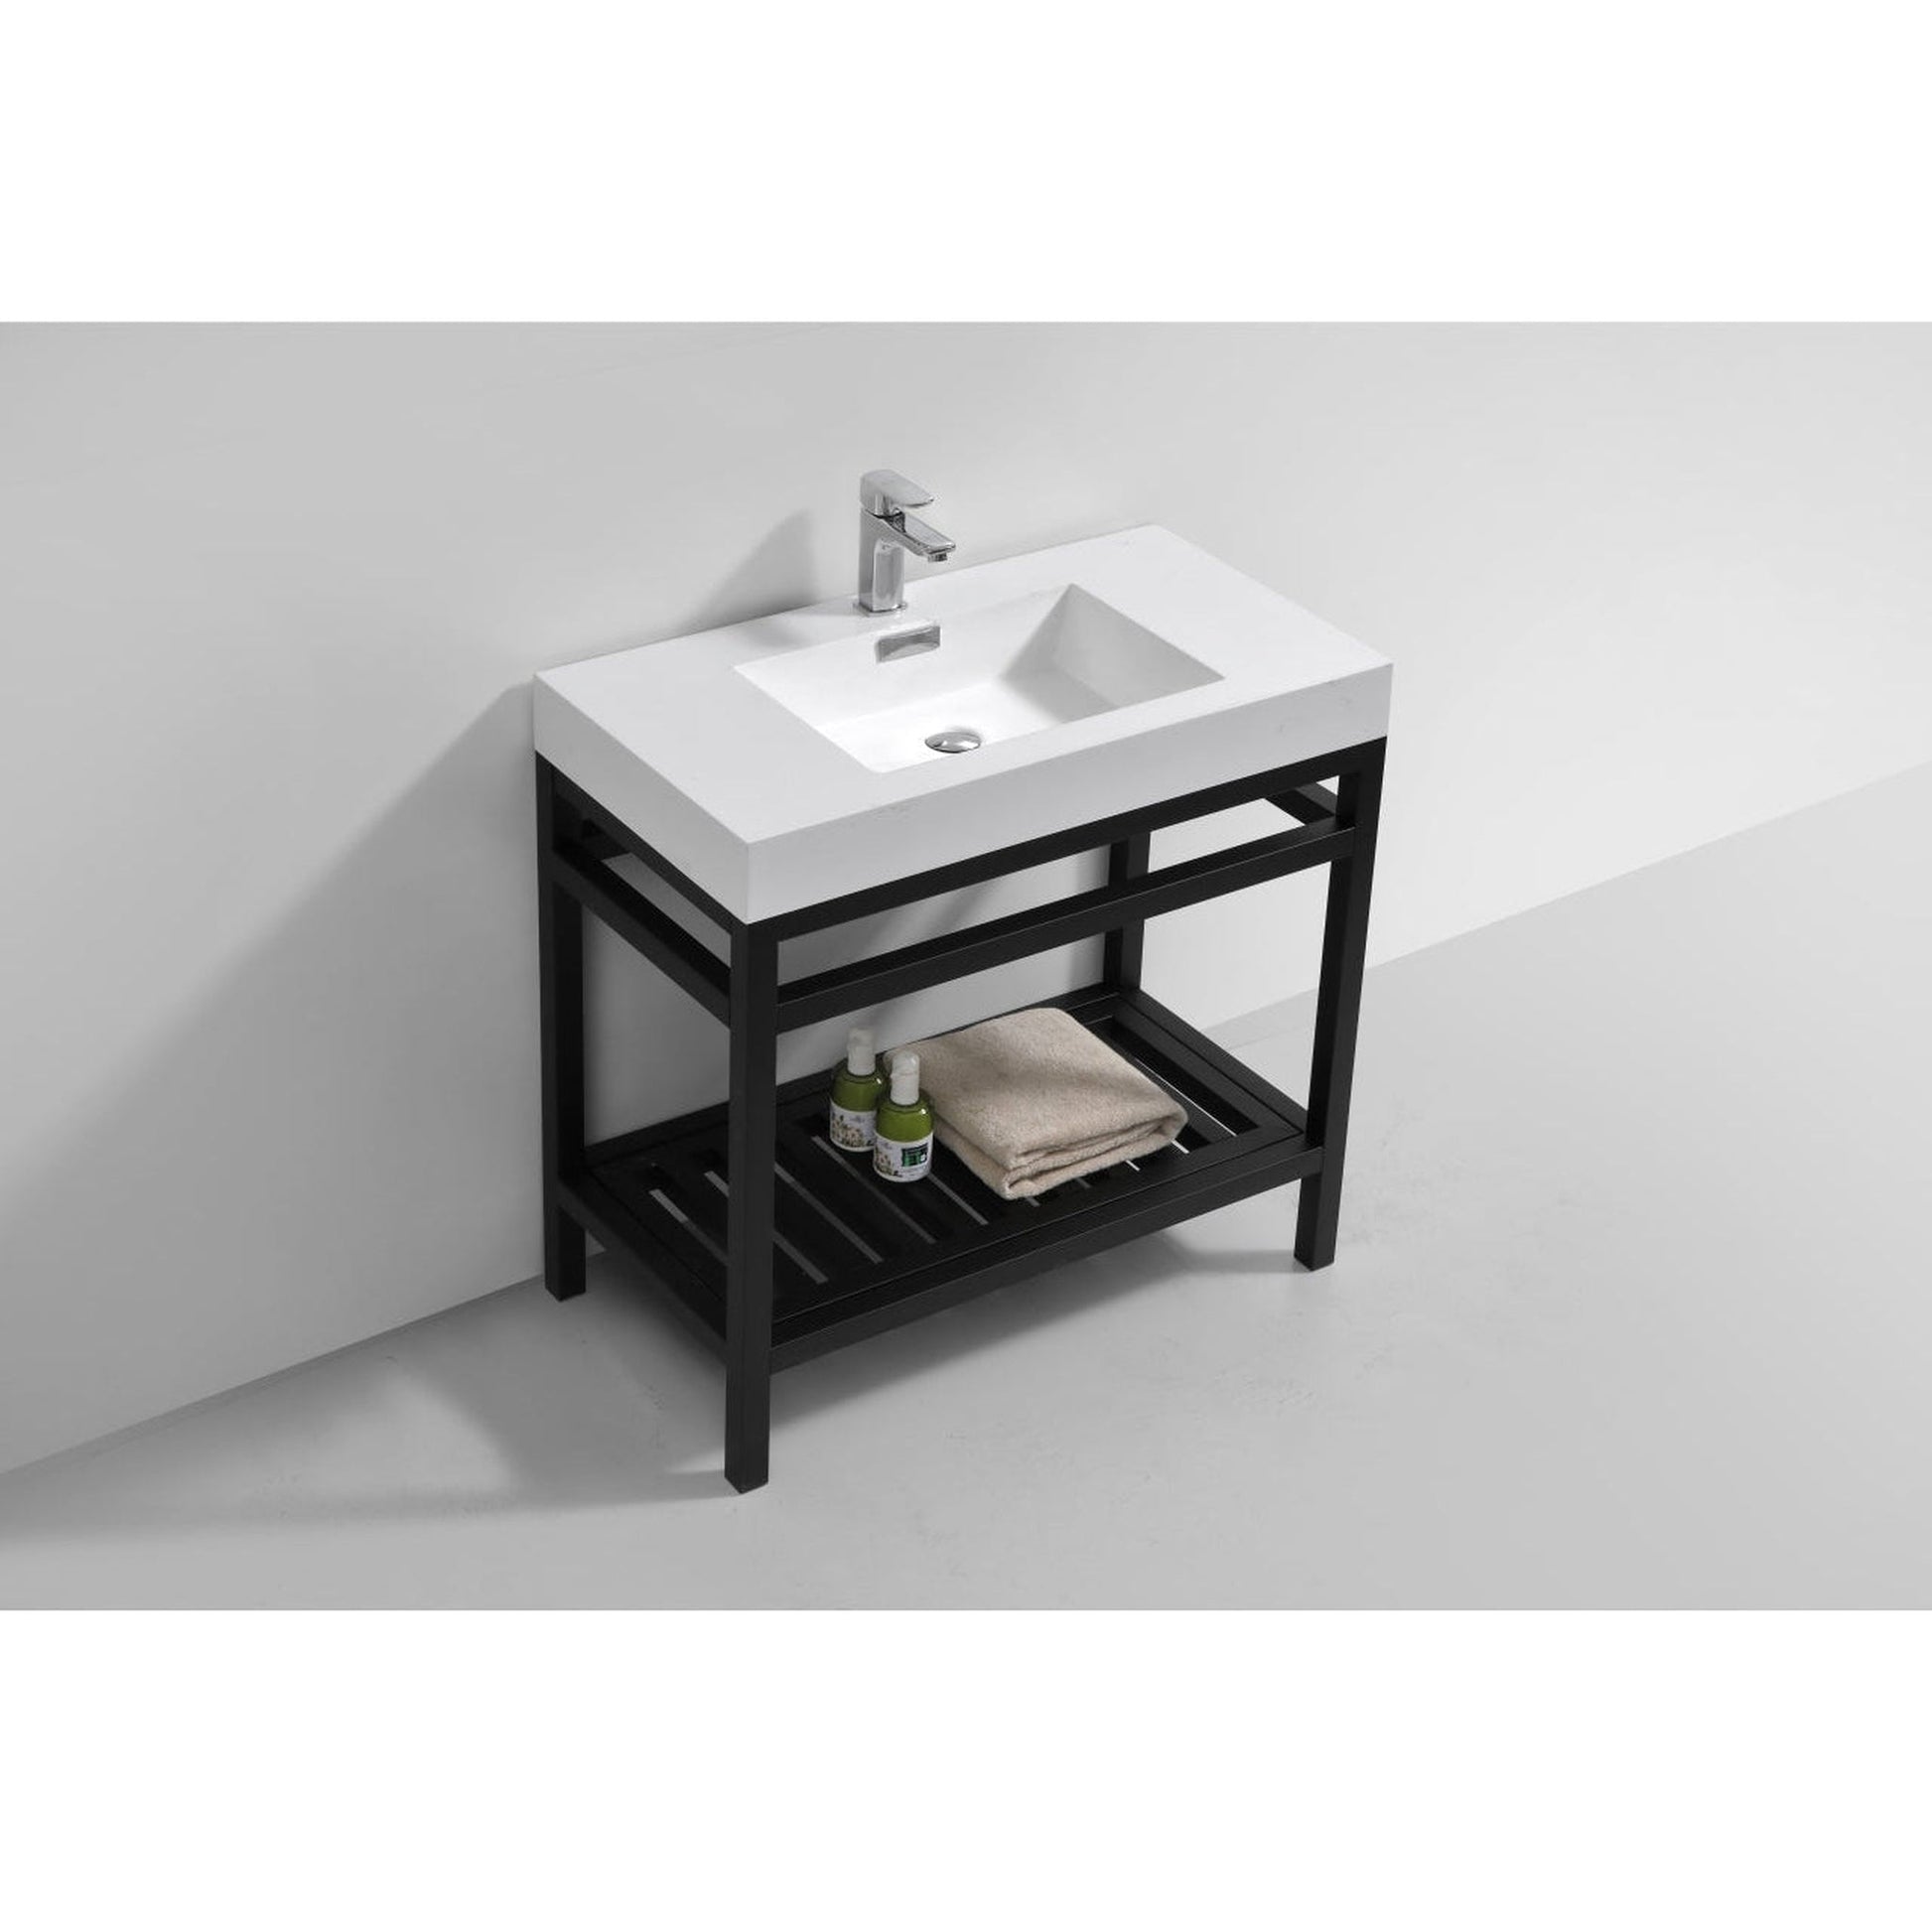 KubeBath Cisco 36" Stainless Steel Matte Black Console Freestanding Modern Bathroom Vanity With Single Integrated Acrylic Sink With Overflow and 34" Black Framed Mirror